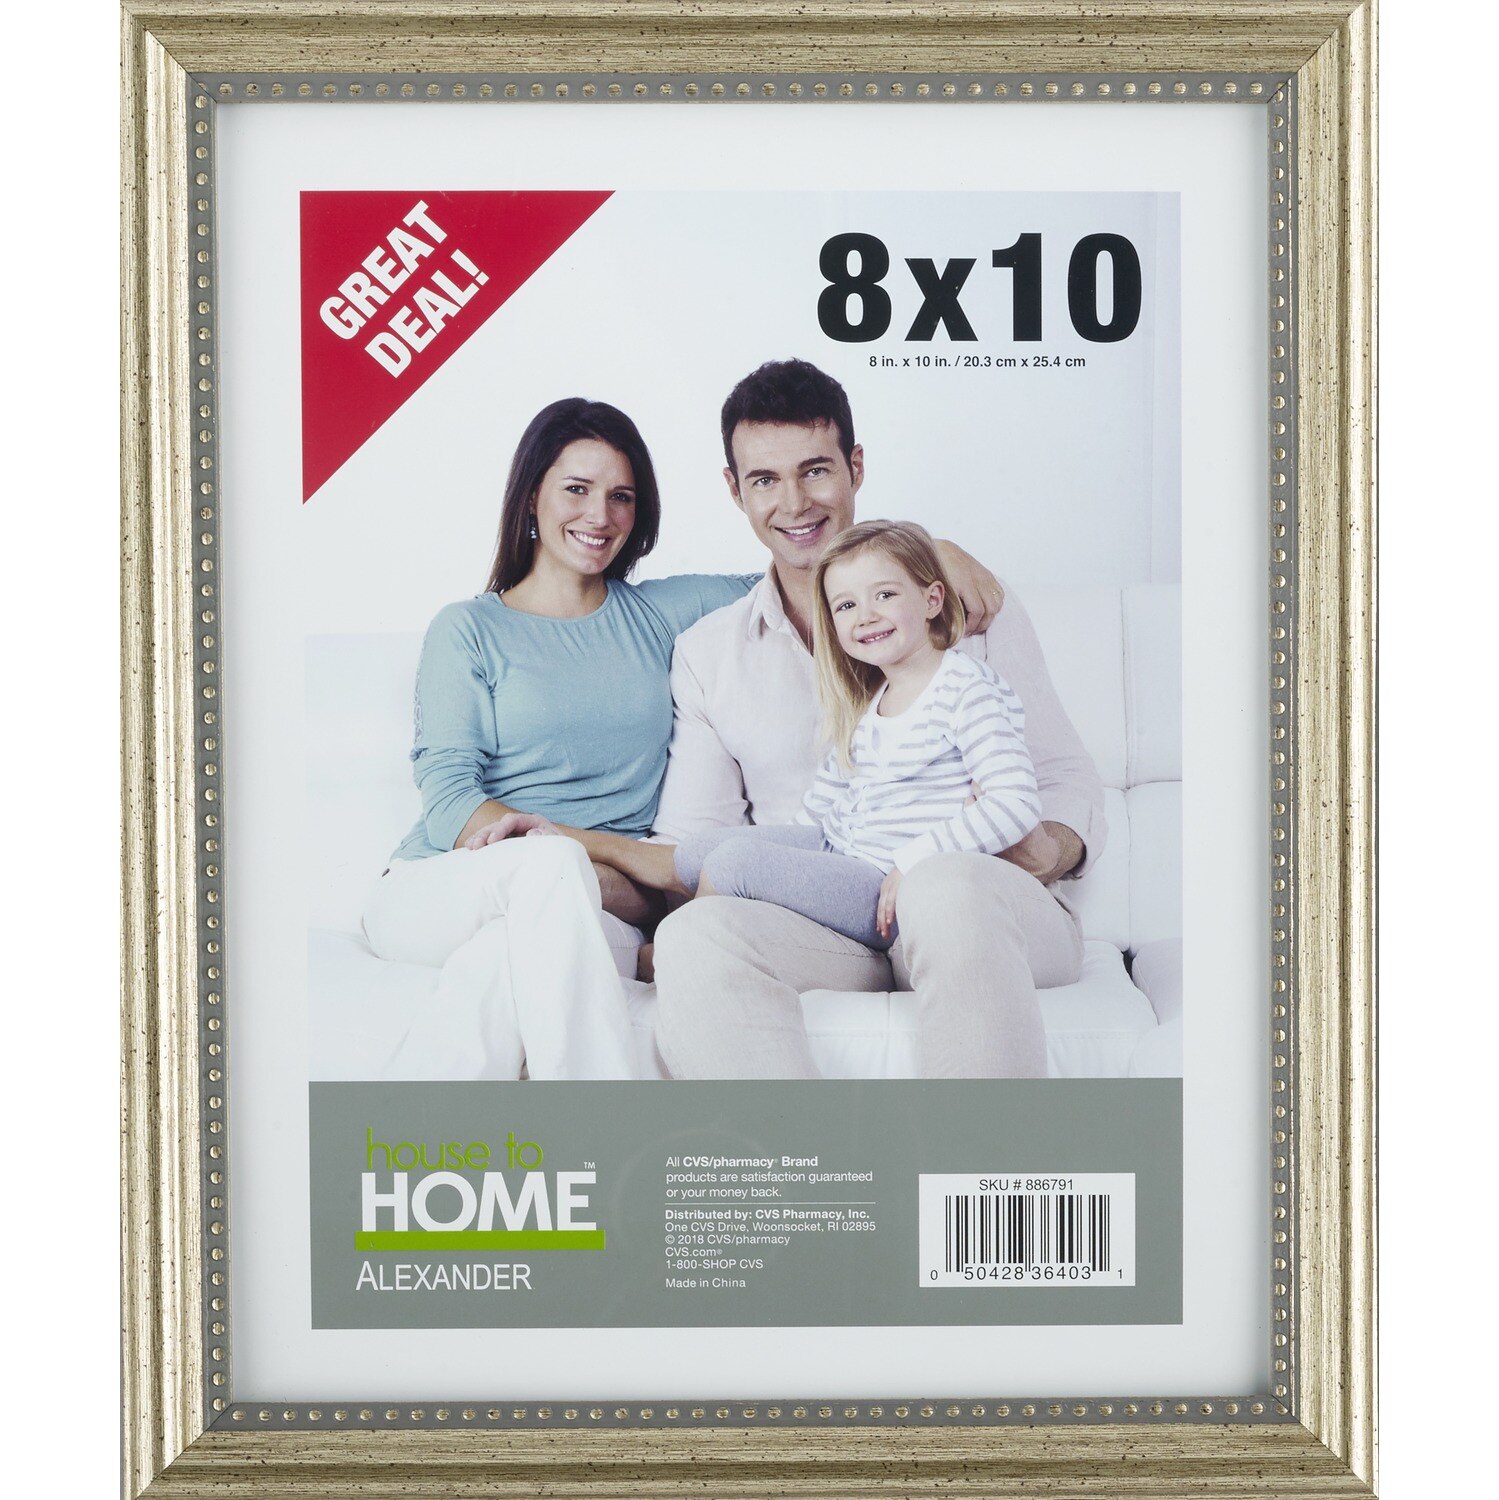 House To Home Alexander 8x10 Picture Frame